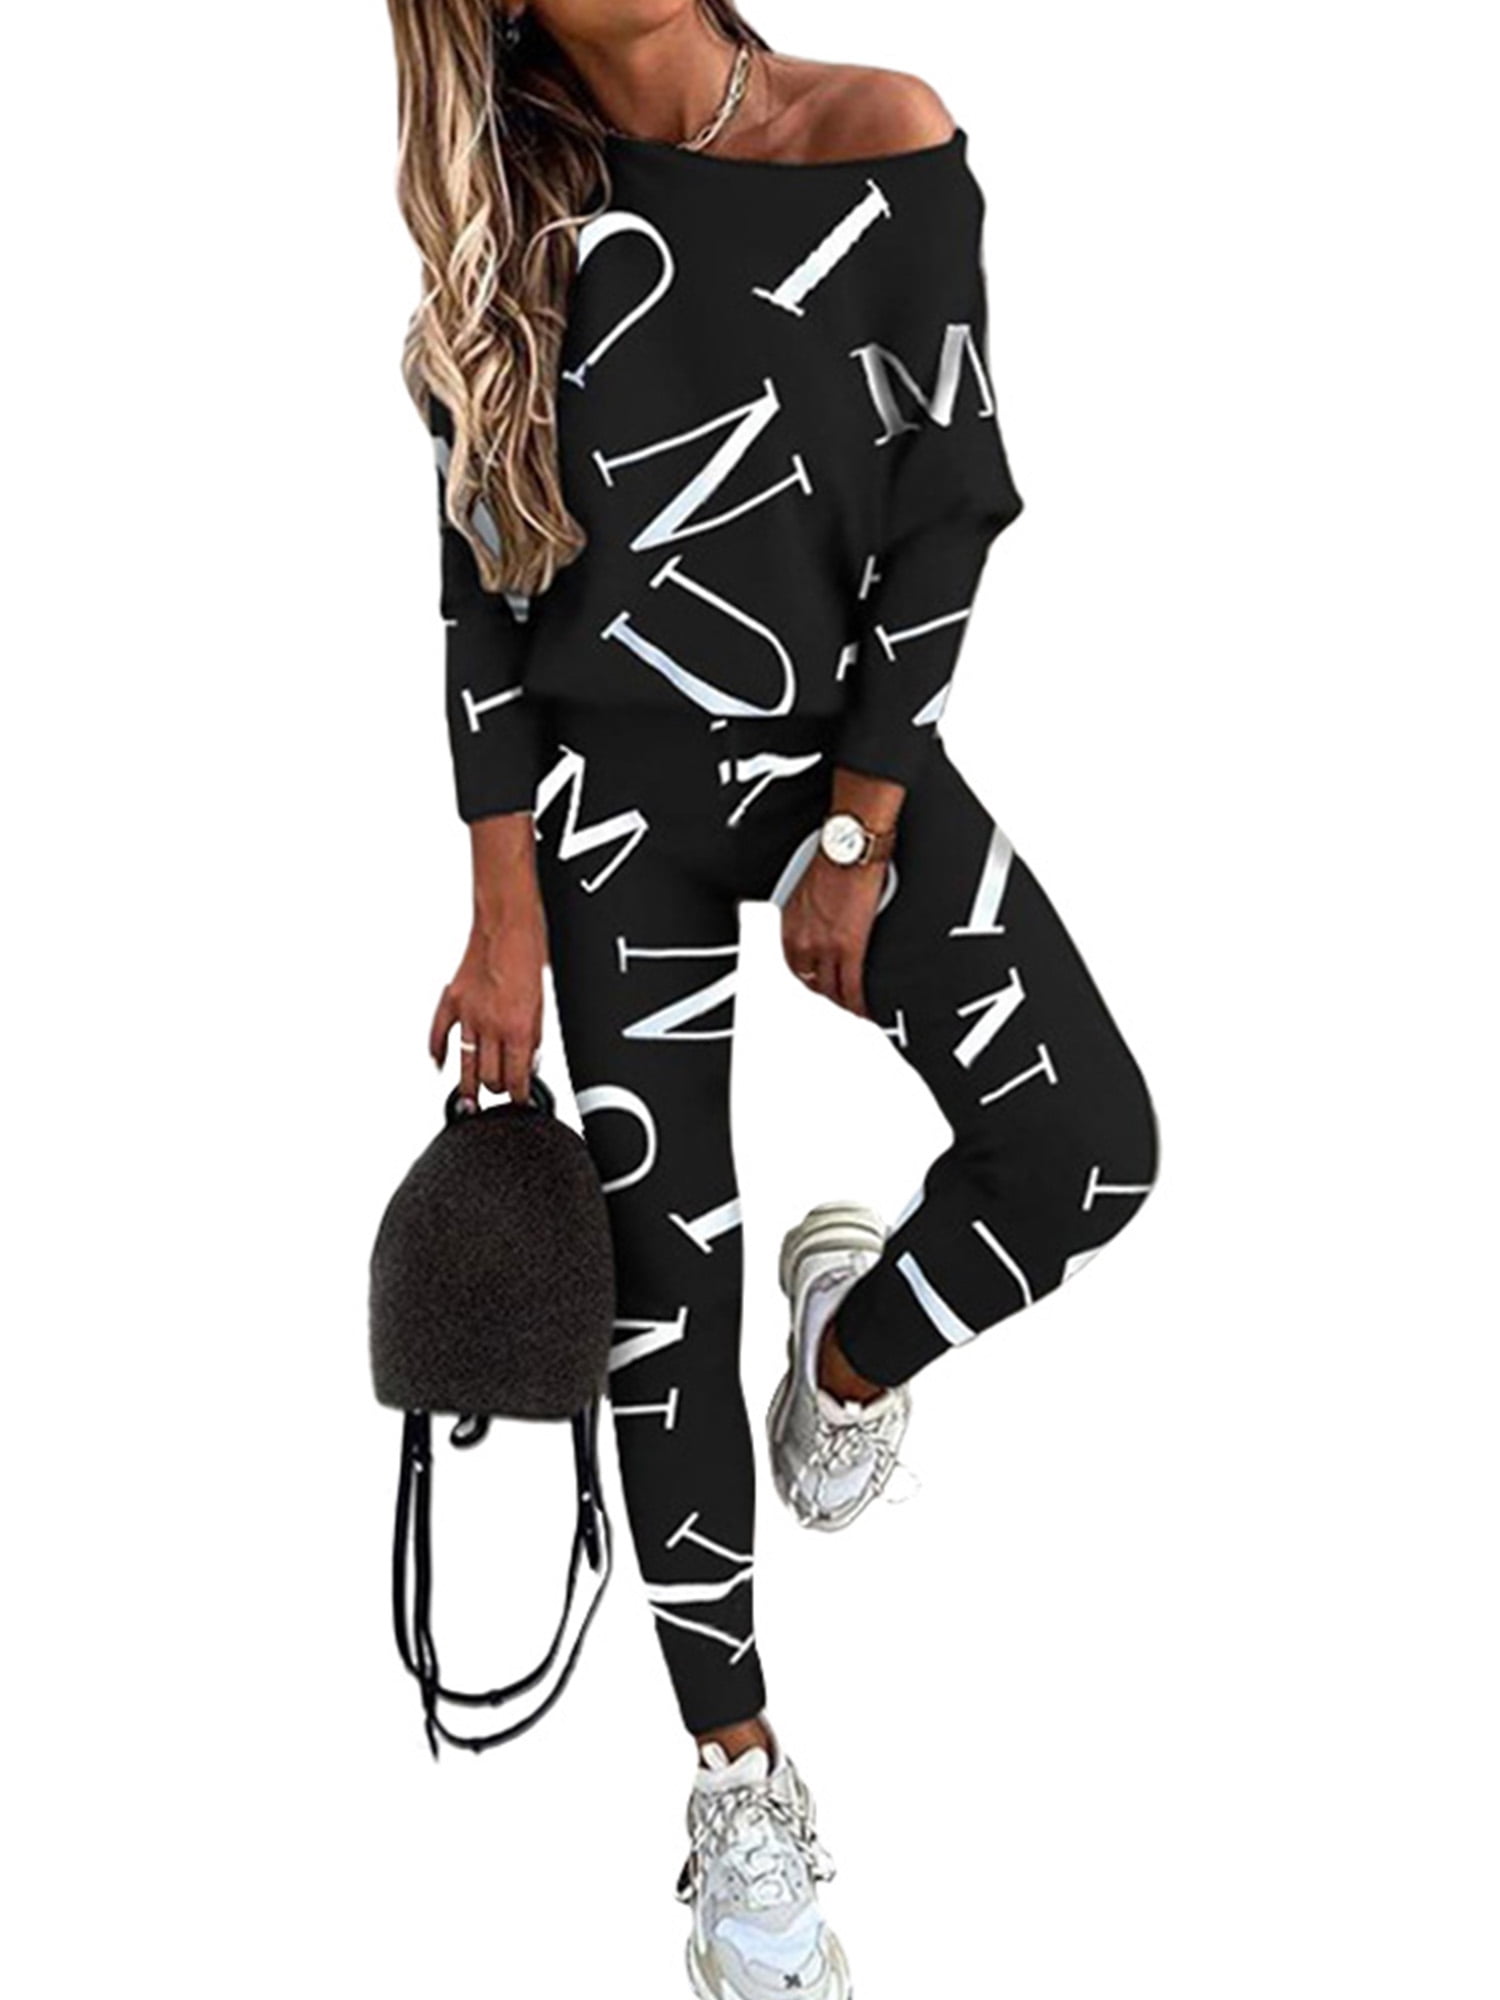 Avamo Two Piece Outfits for Women Letter Print Casual Sweatsuits Bikers ...